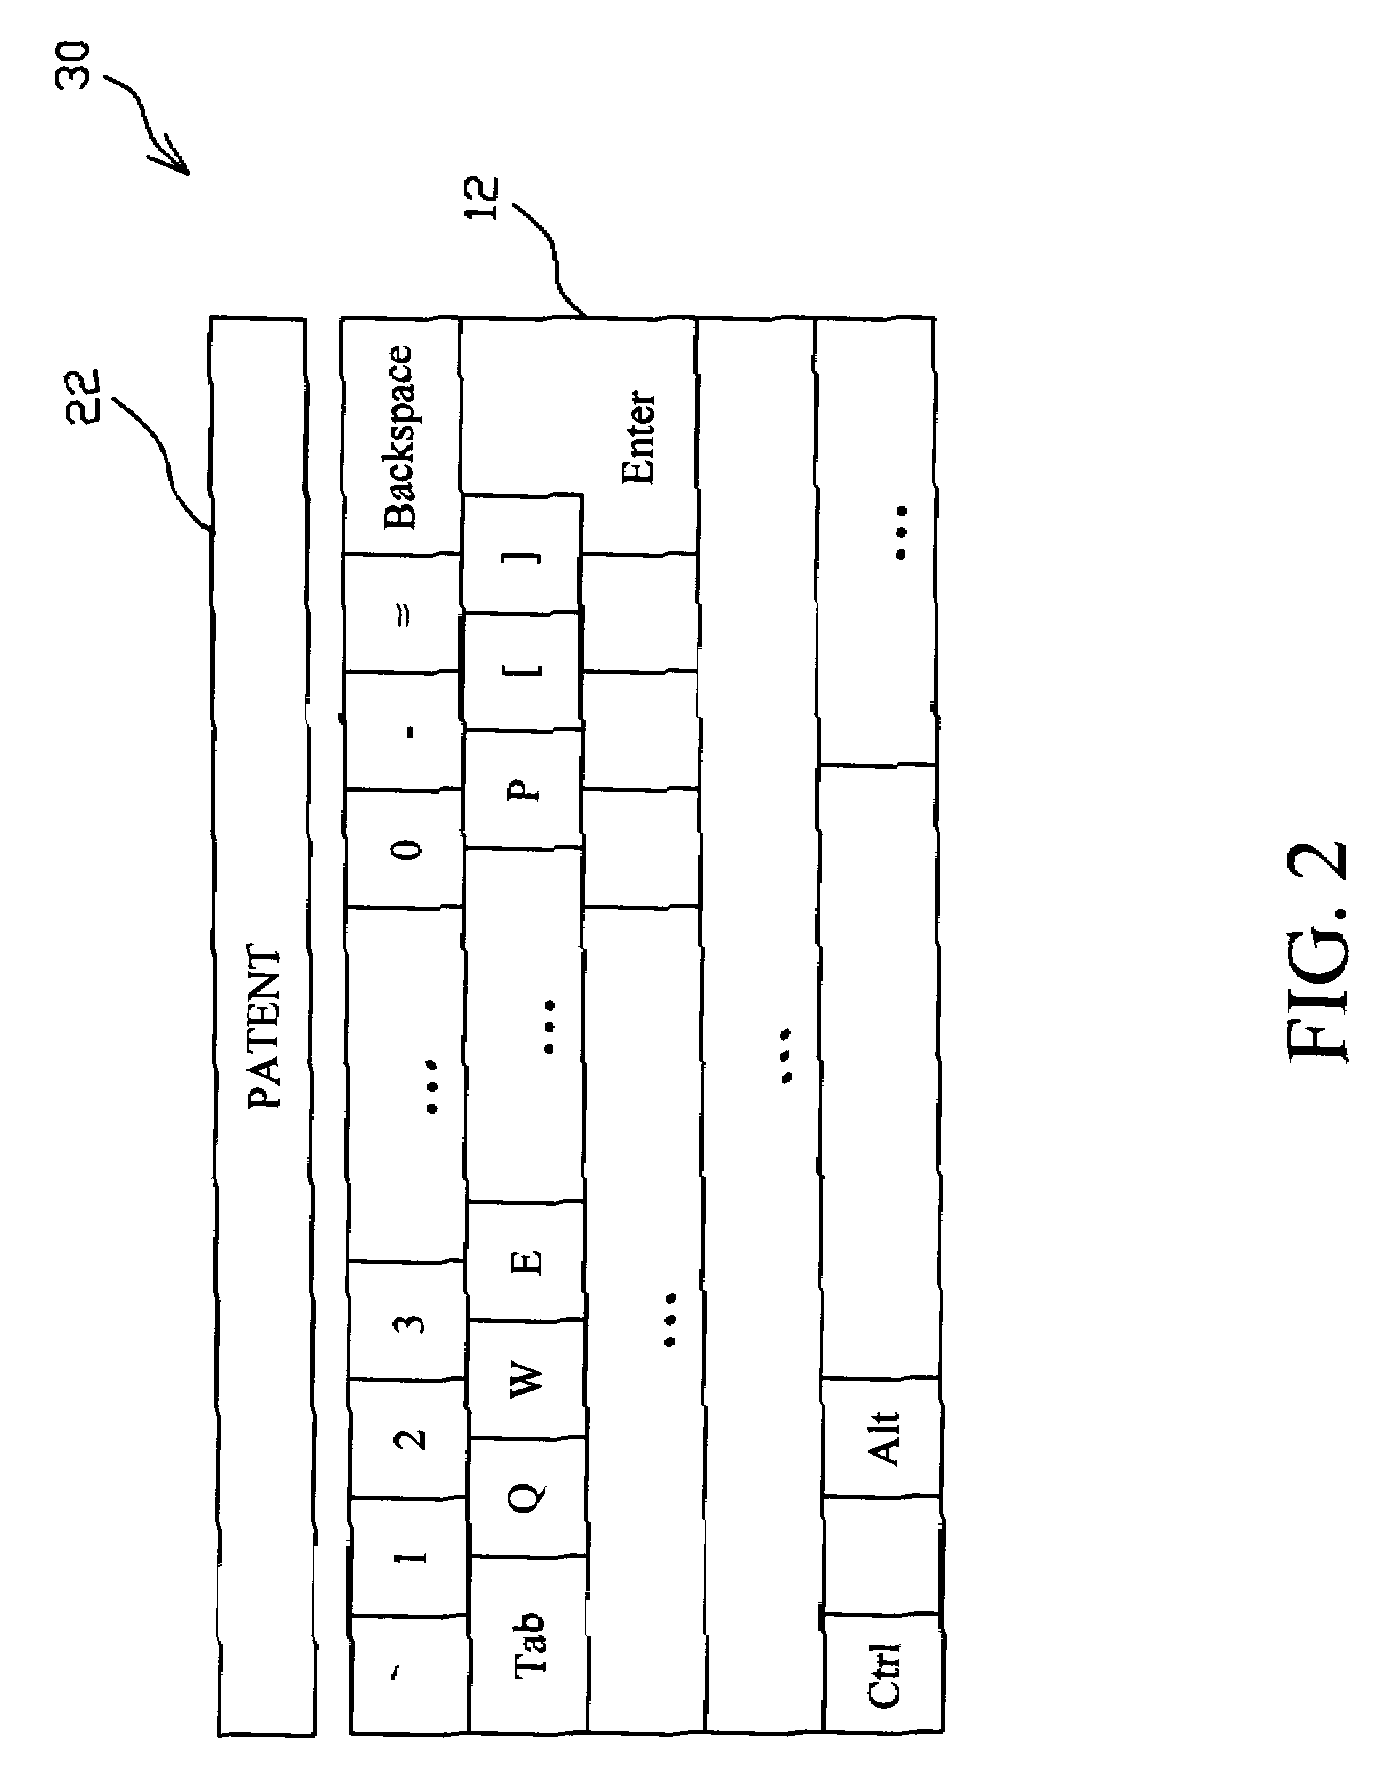 Capacitive touchpad integrated with key and handwriting functions